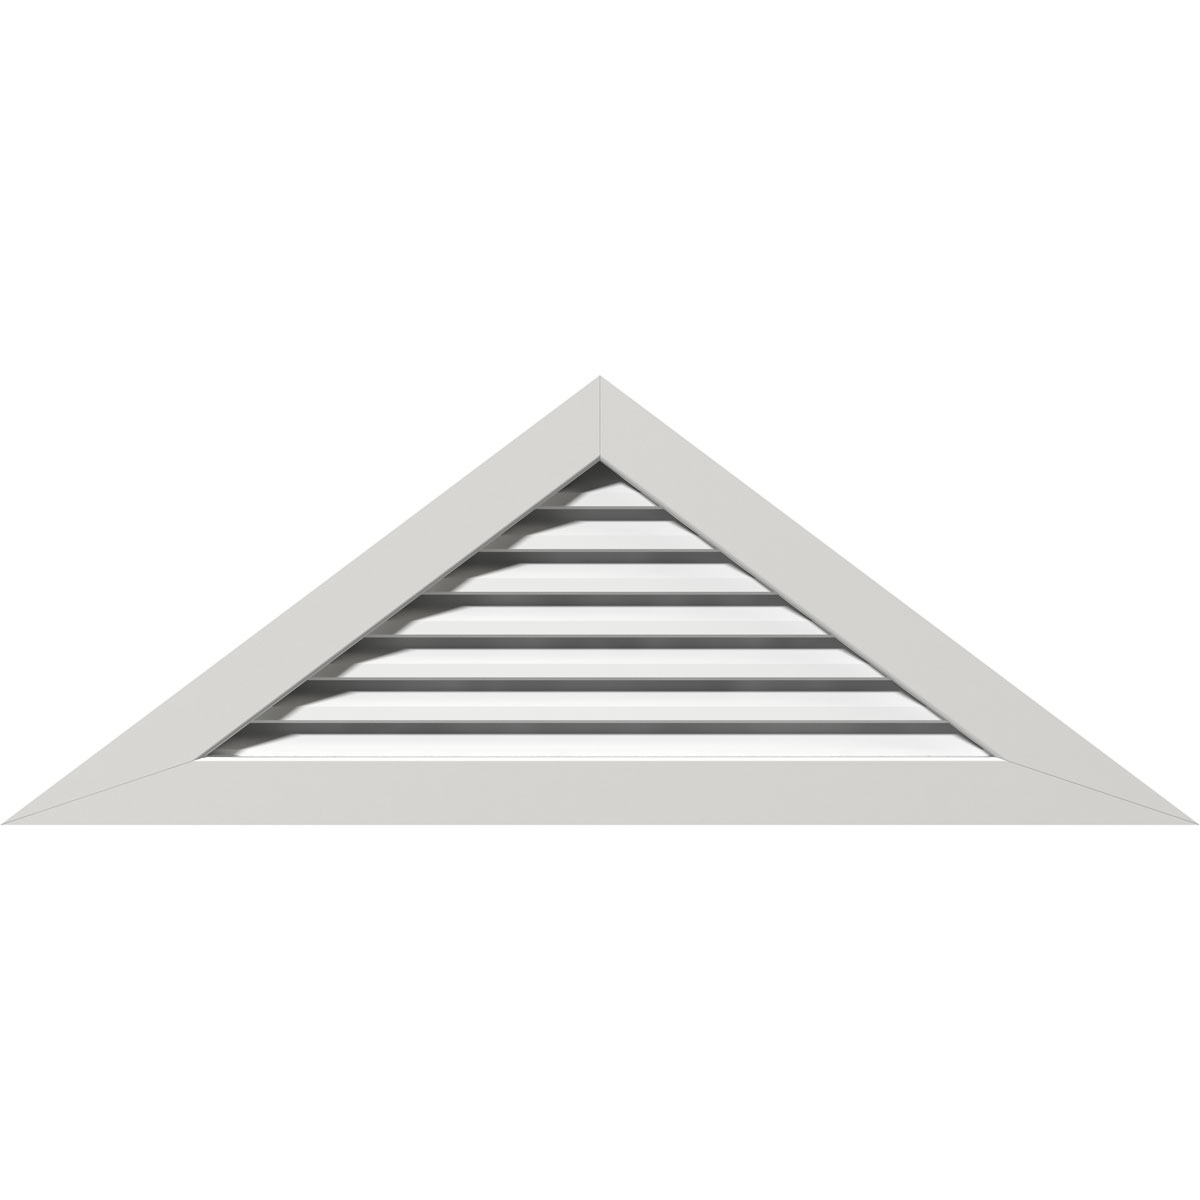 Ekena Millwork 44"W x 14 5/8"H Triangle Gable Vent (60 1/2"W x 20 1/8"H Frame Size) 8/12 Pitch Functional, PVC Gable Vent with 1" x 4" Flat Trim Frame - image 1 of 14